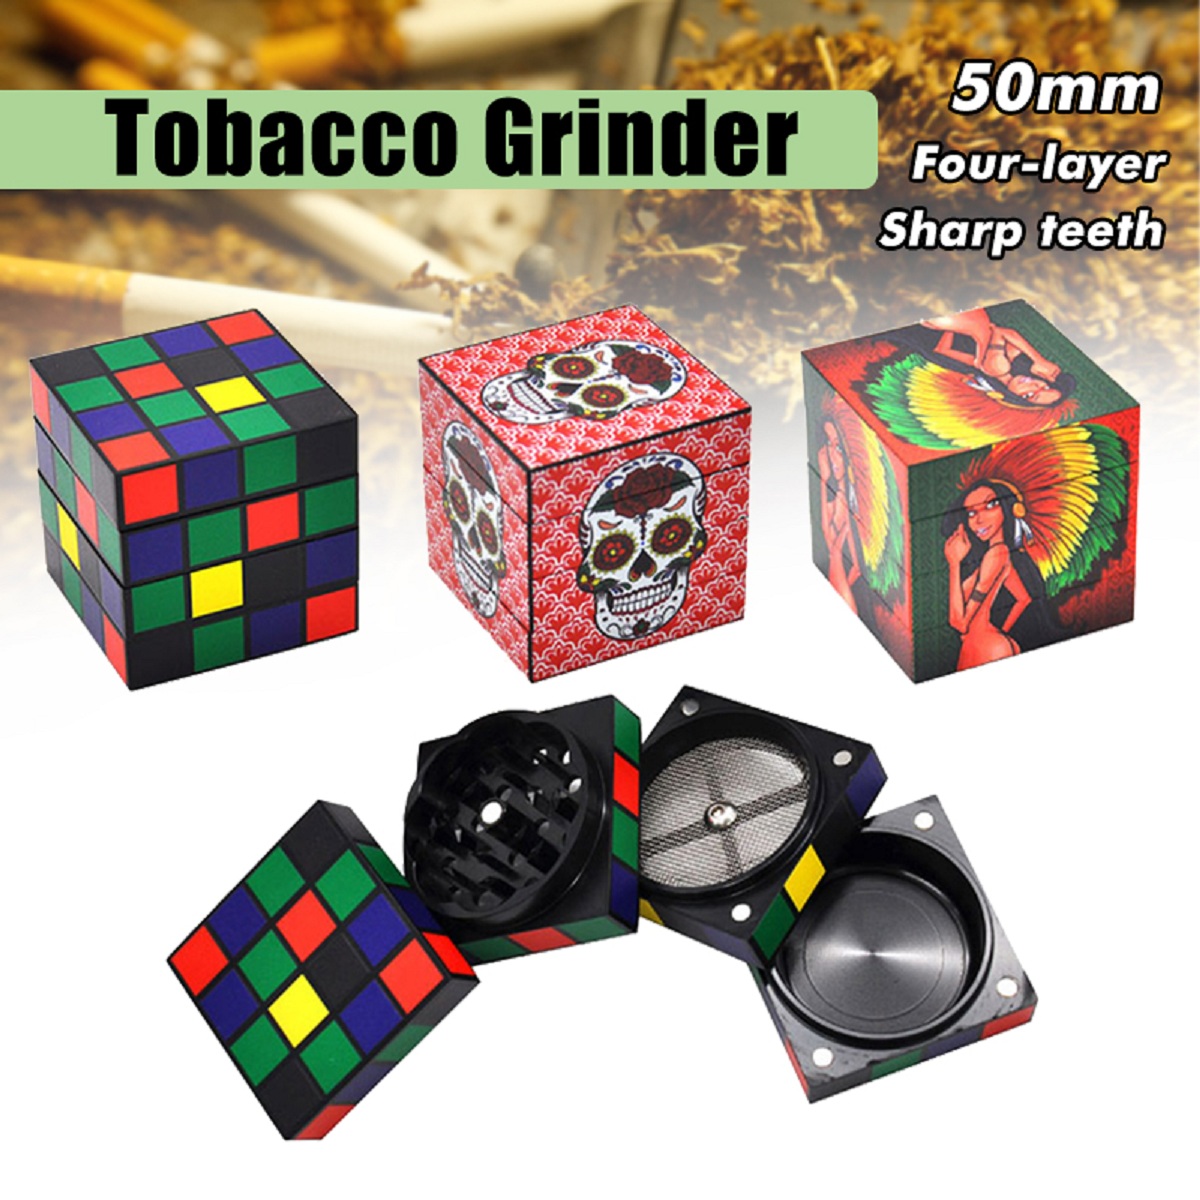 Spice-Grinder-Aluminum-Alloy-Spice-Crusher-4-Pieces-Diameter-50mm-Grinder-With-Scrapers-1571189-1